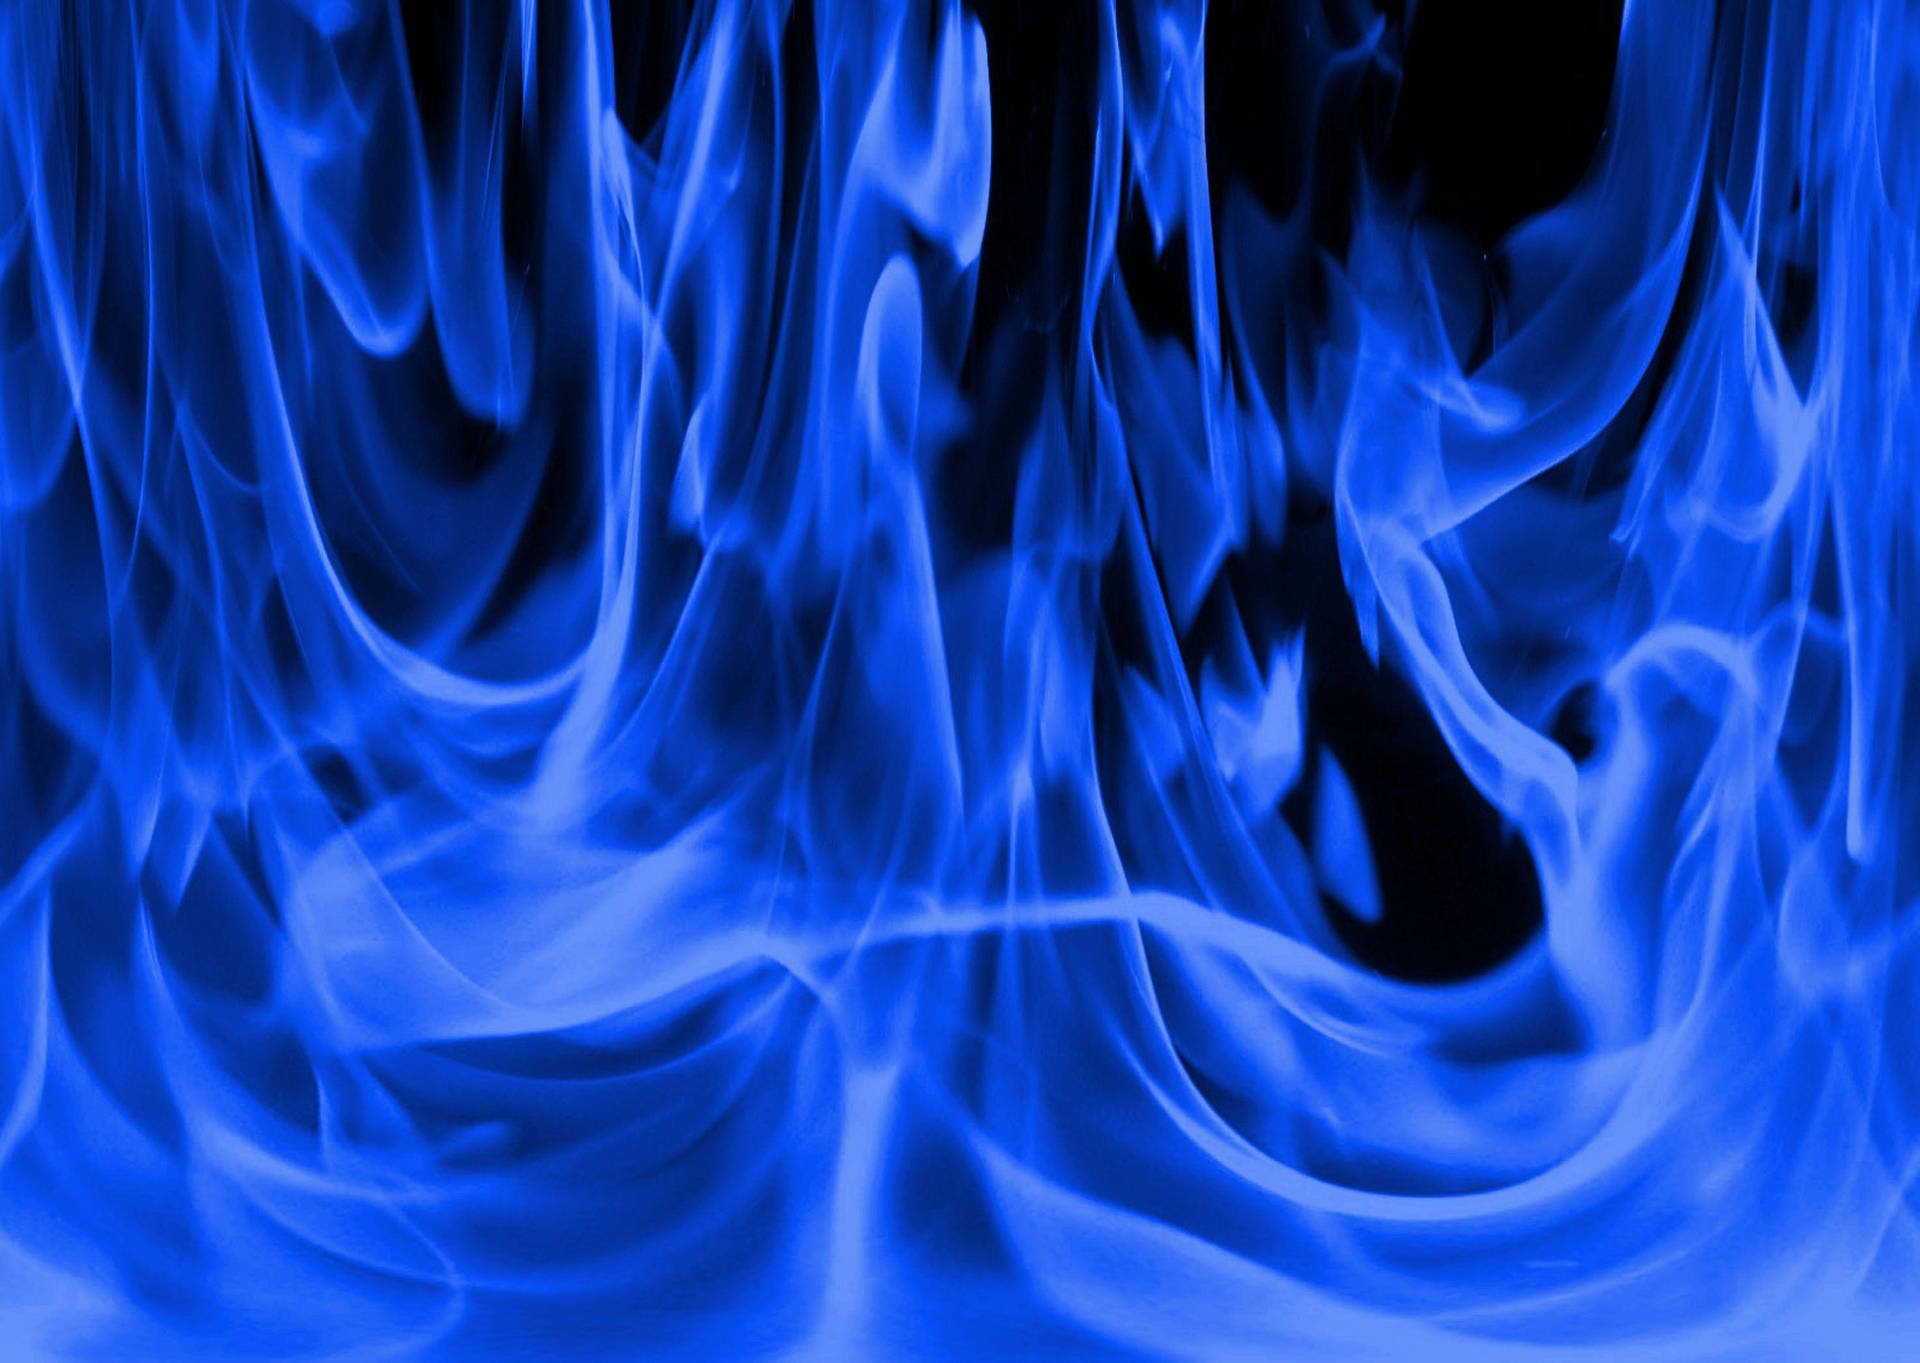 Free Blue Flame Wallpaper Downloads, Blue Flame Wallpaper for FREE